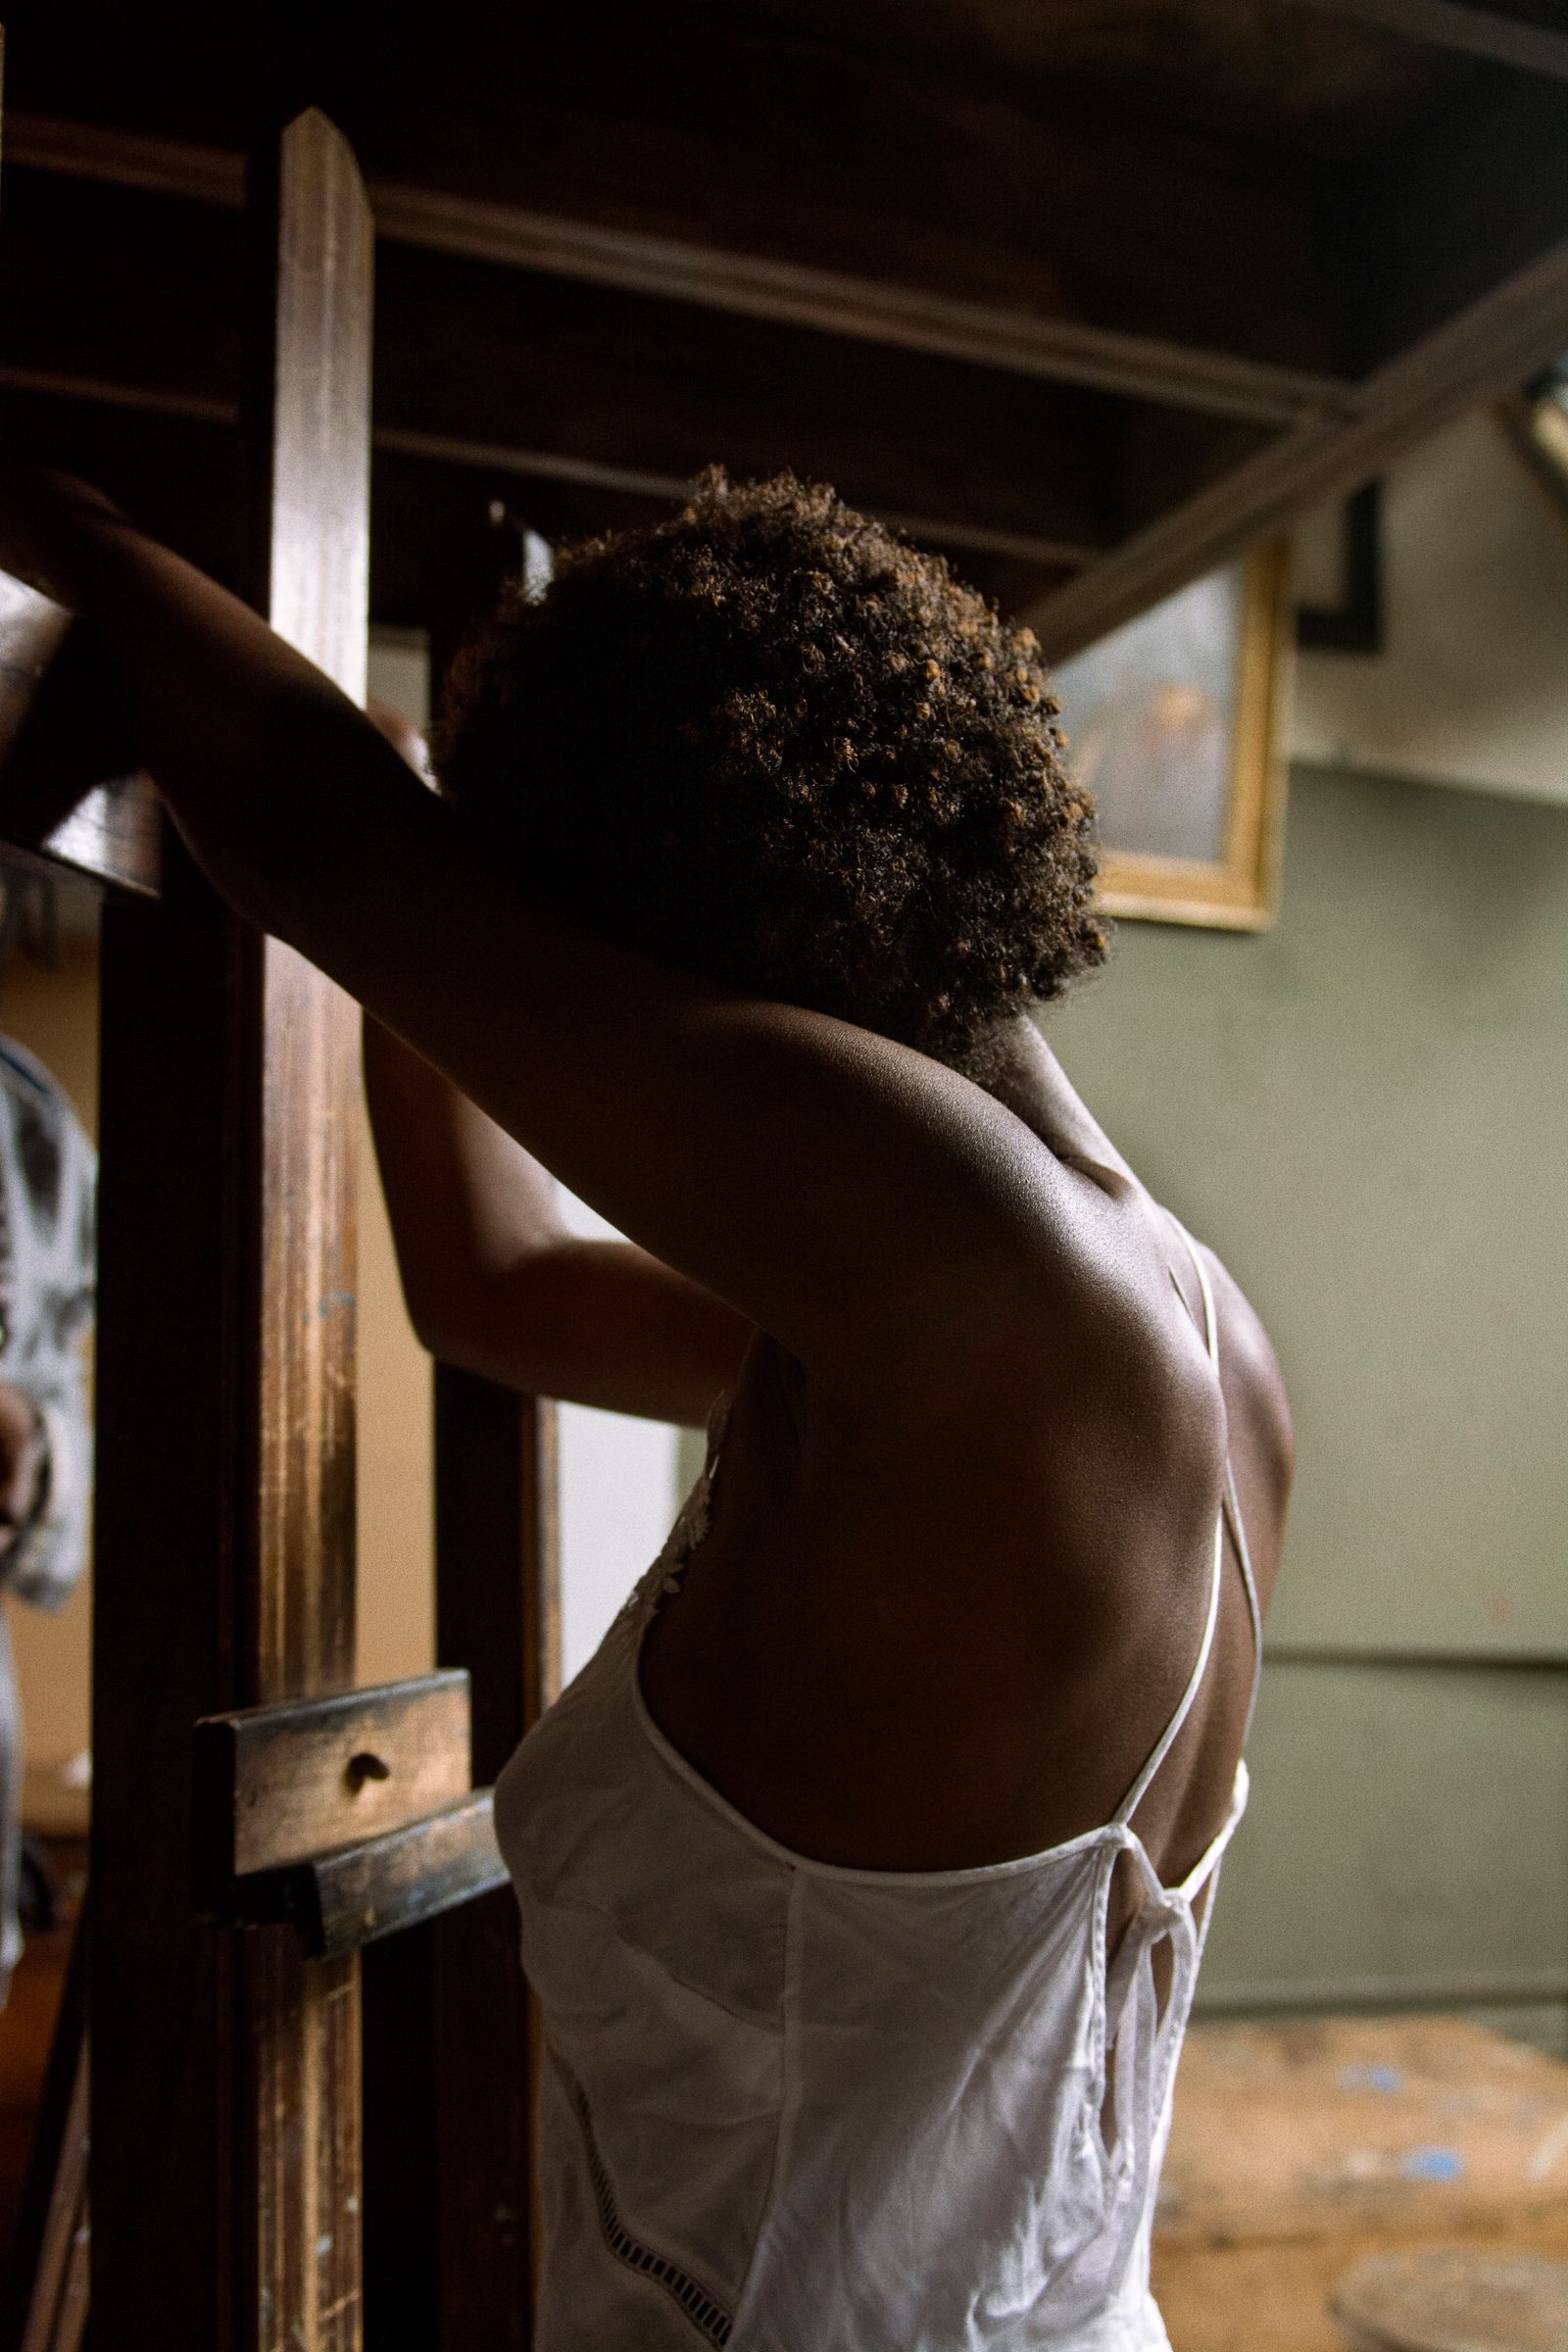 © Erica Genece - Image from the DIASPORA photography project